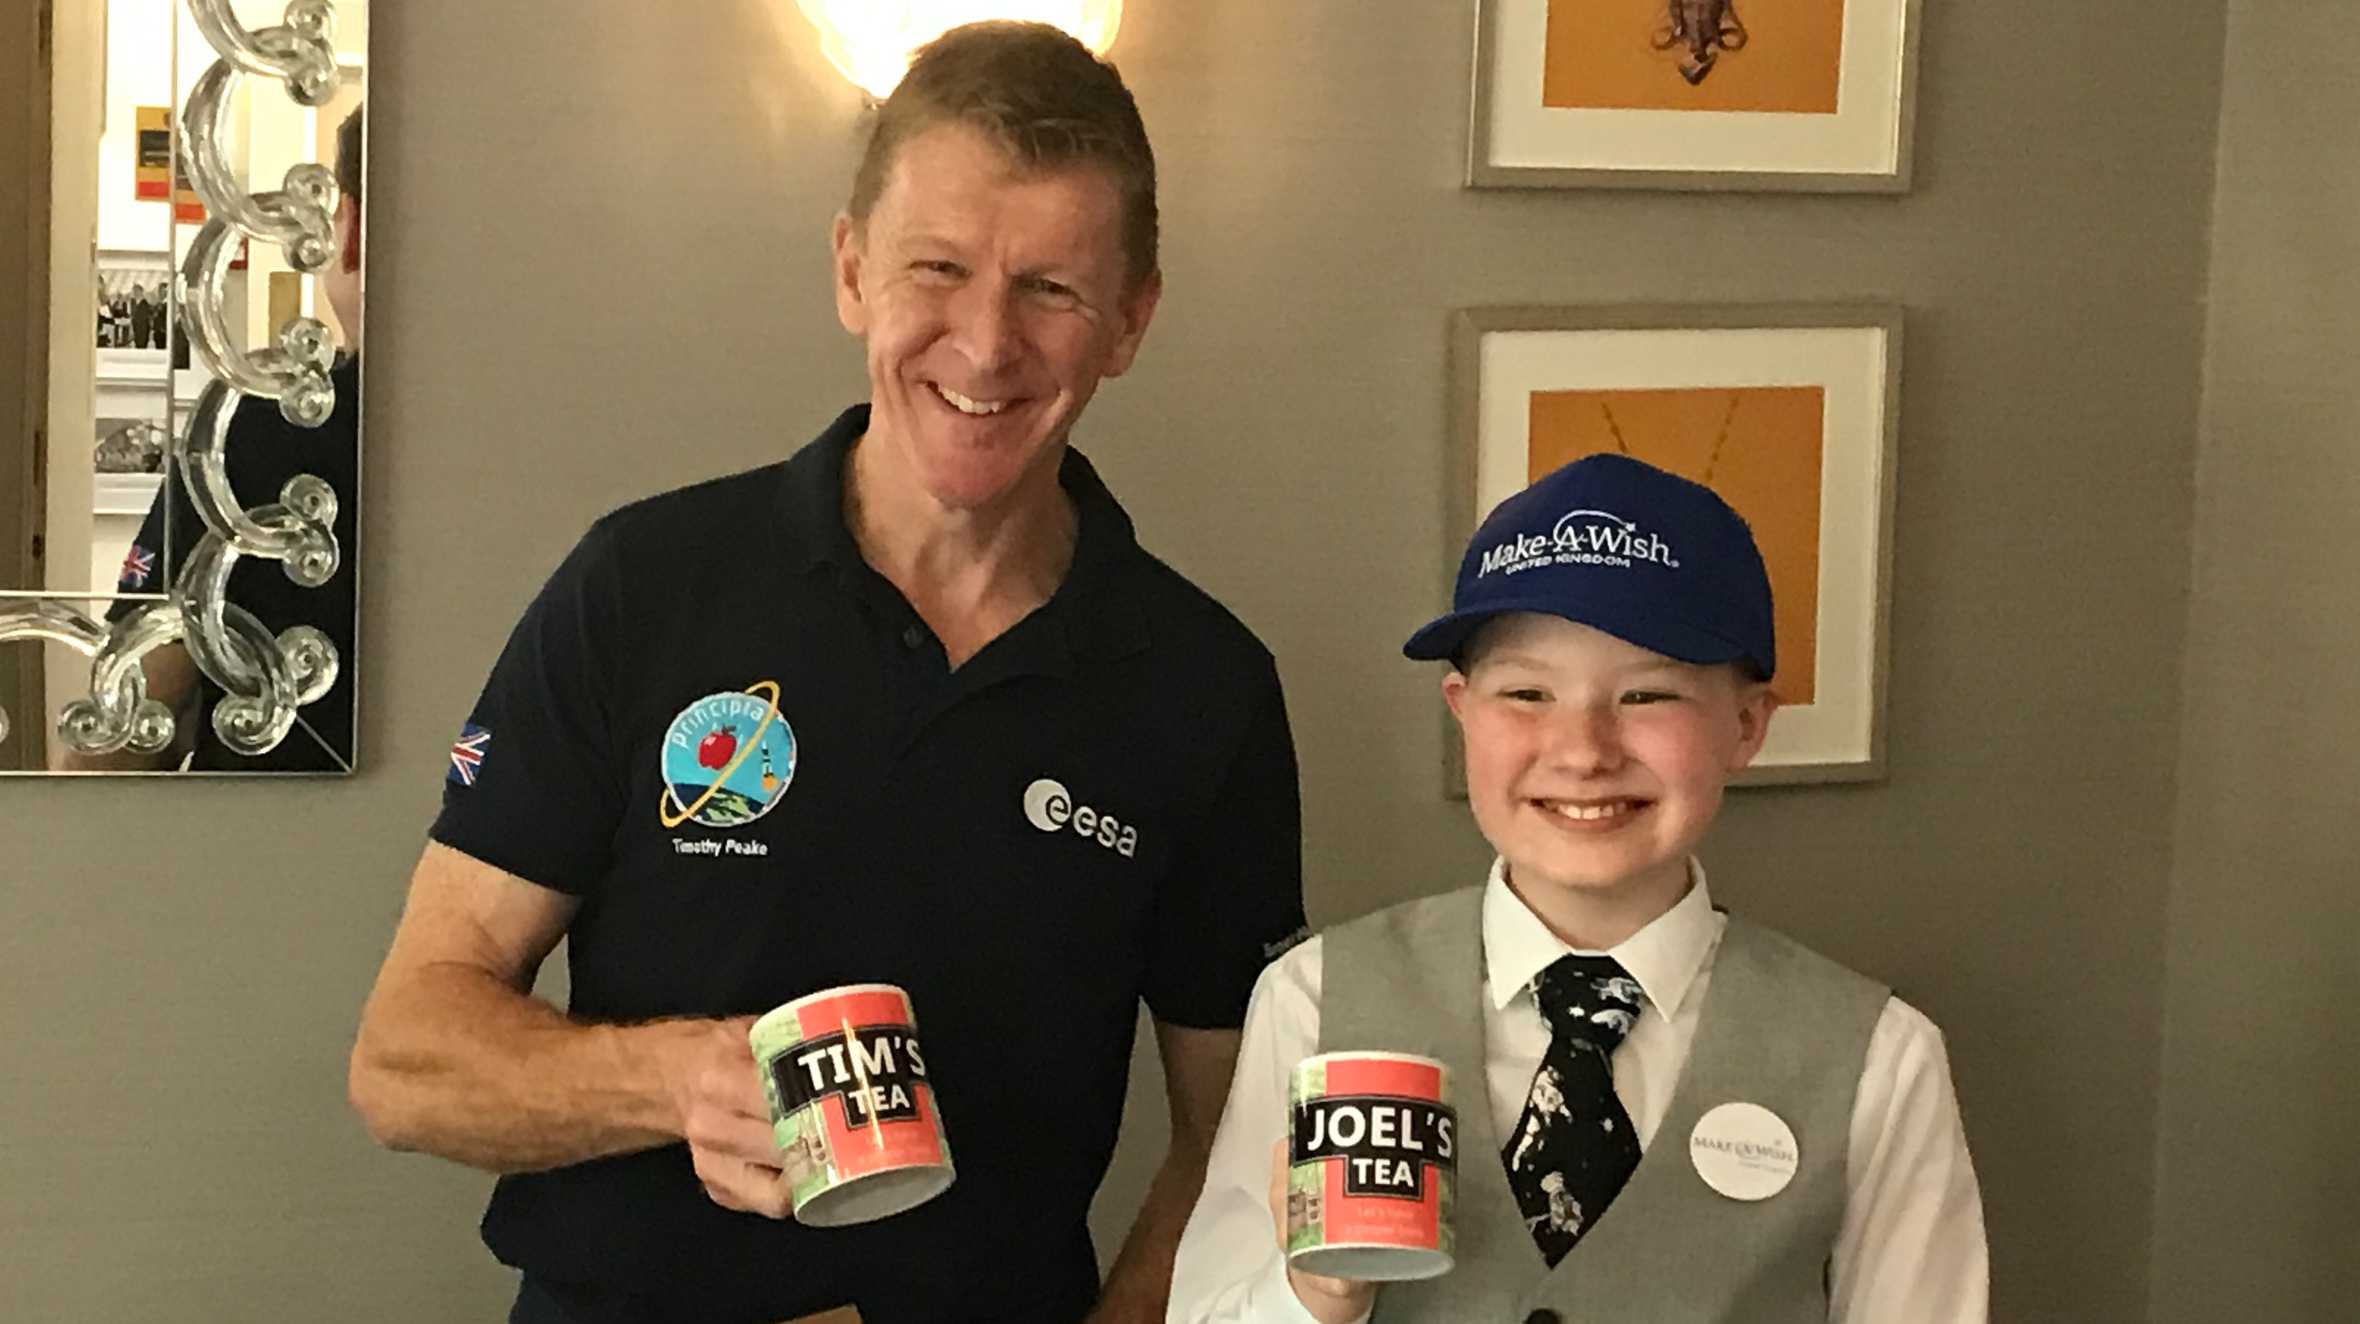 Joel and Tim Peake with their cups of tea